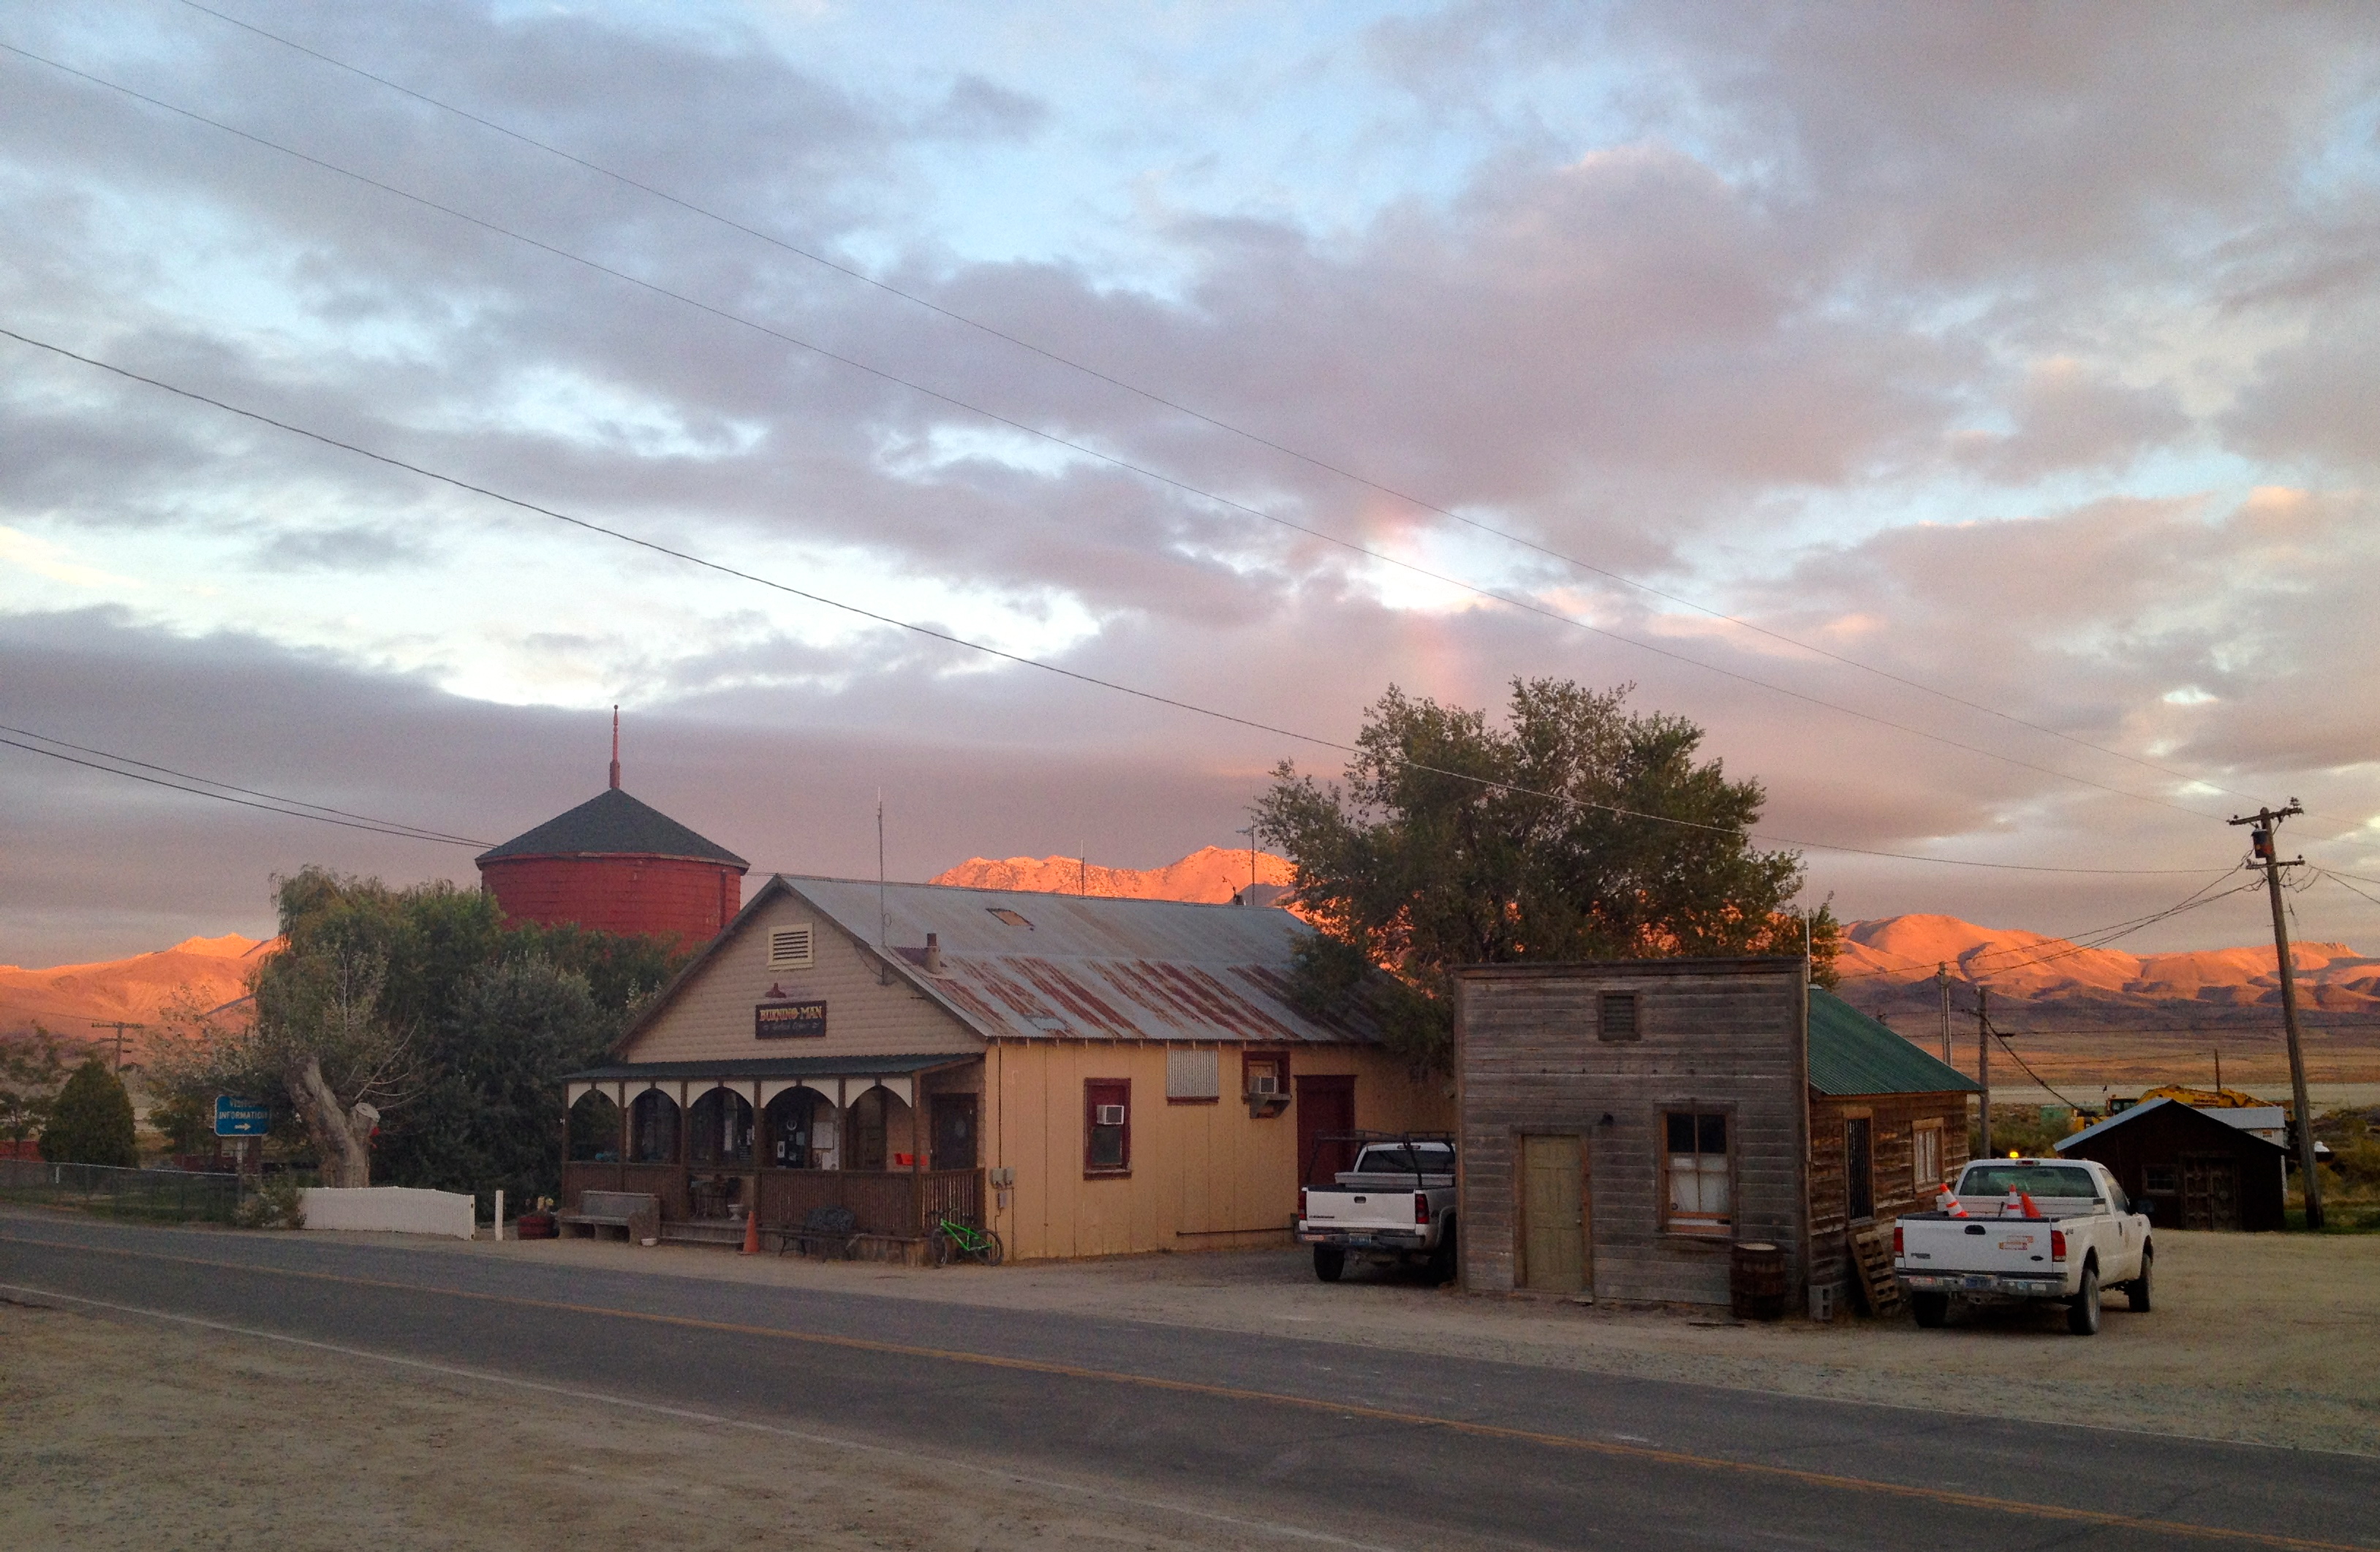 Sun sets across from Burning Man's main office in this old cowboy town, with the auxiliary office to the right that's actually an old jailhouse. Come in to get a charged battery for your crew radio; stay for the fantasies about what kind of folks had been in there before we were even alive.